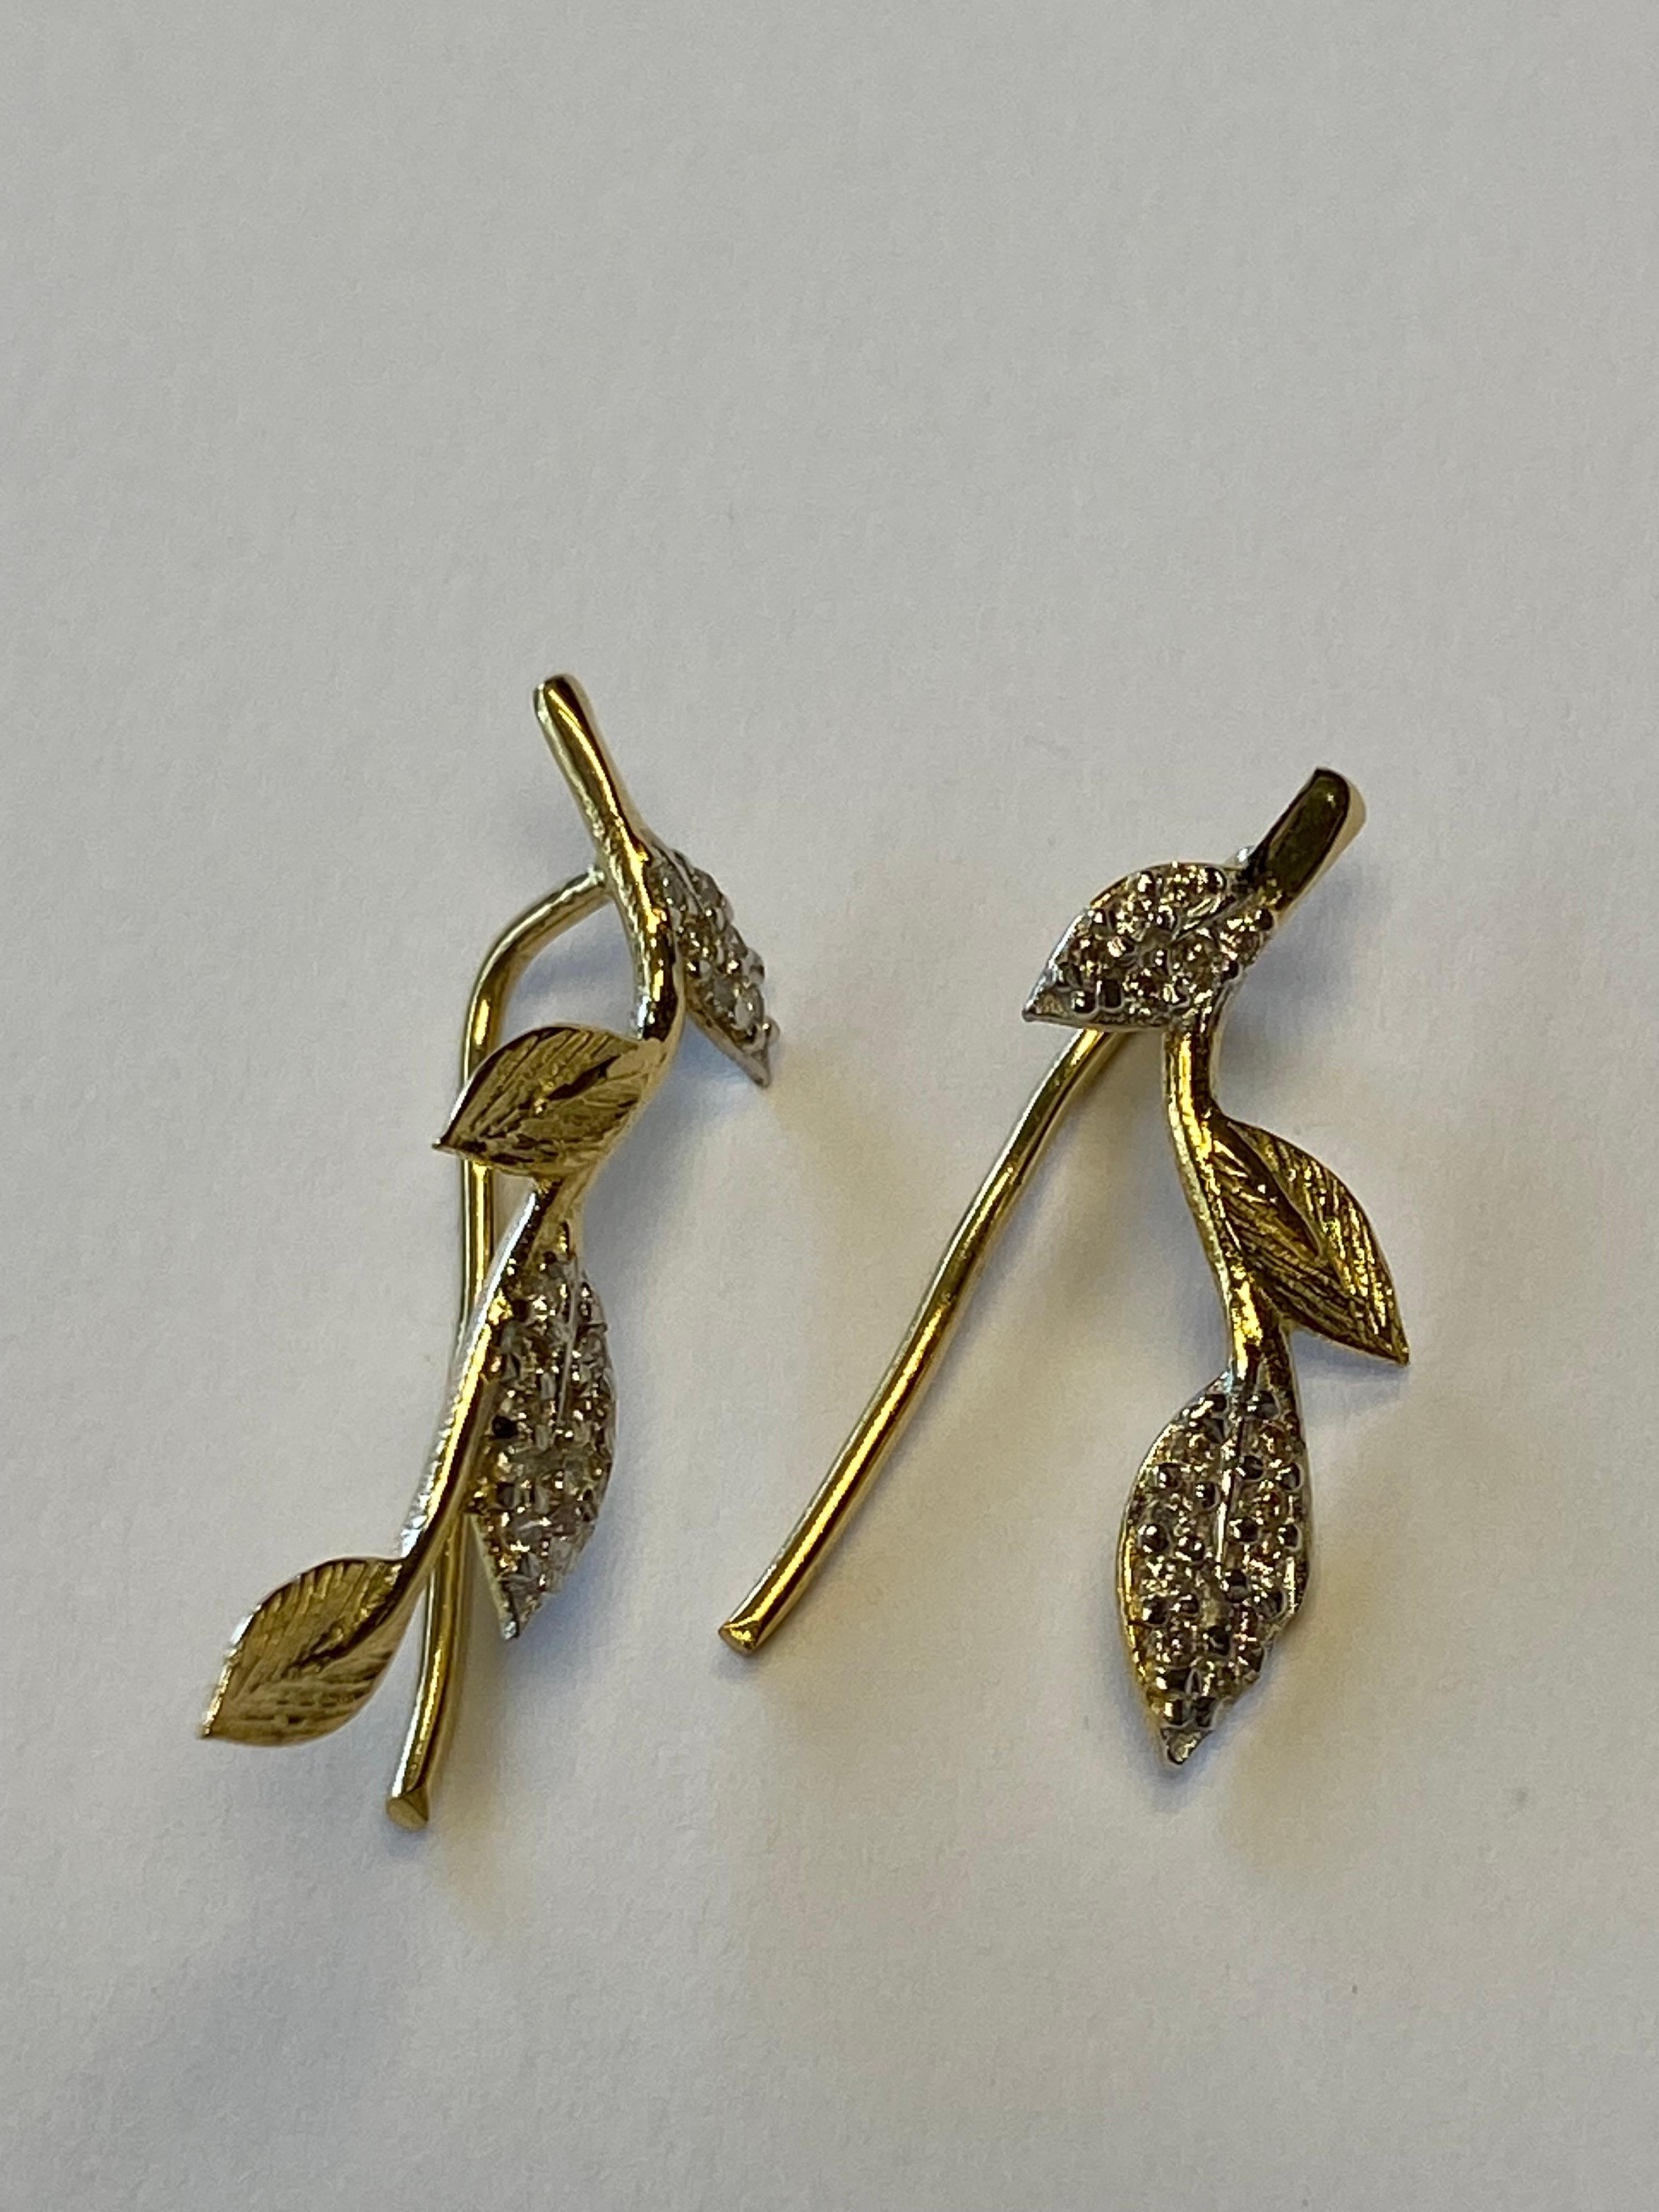 14 Karat Yellow Gold Hand-Crafted Polish-Finished Hand-Crafted Leaf Vine Climber Earrings, Accented with 0.18 Carats of Pave Set Diamond Leaves.  Wire Back Finding Closure.
